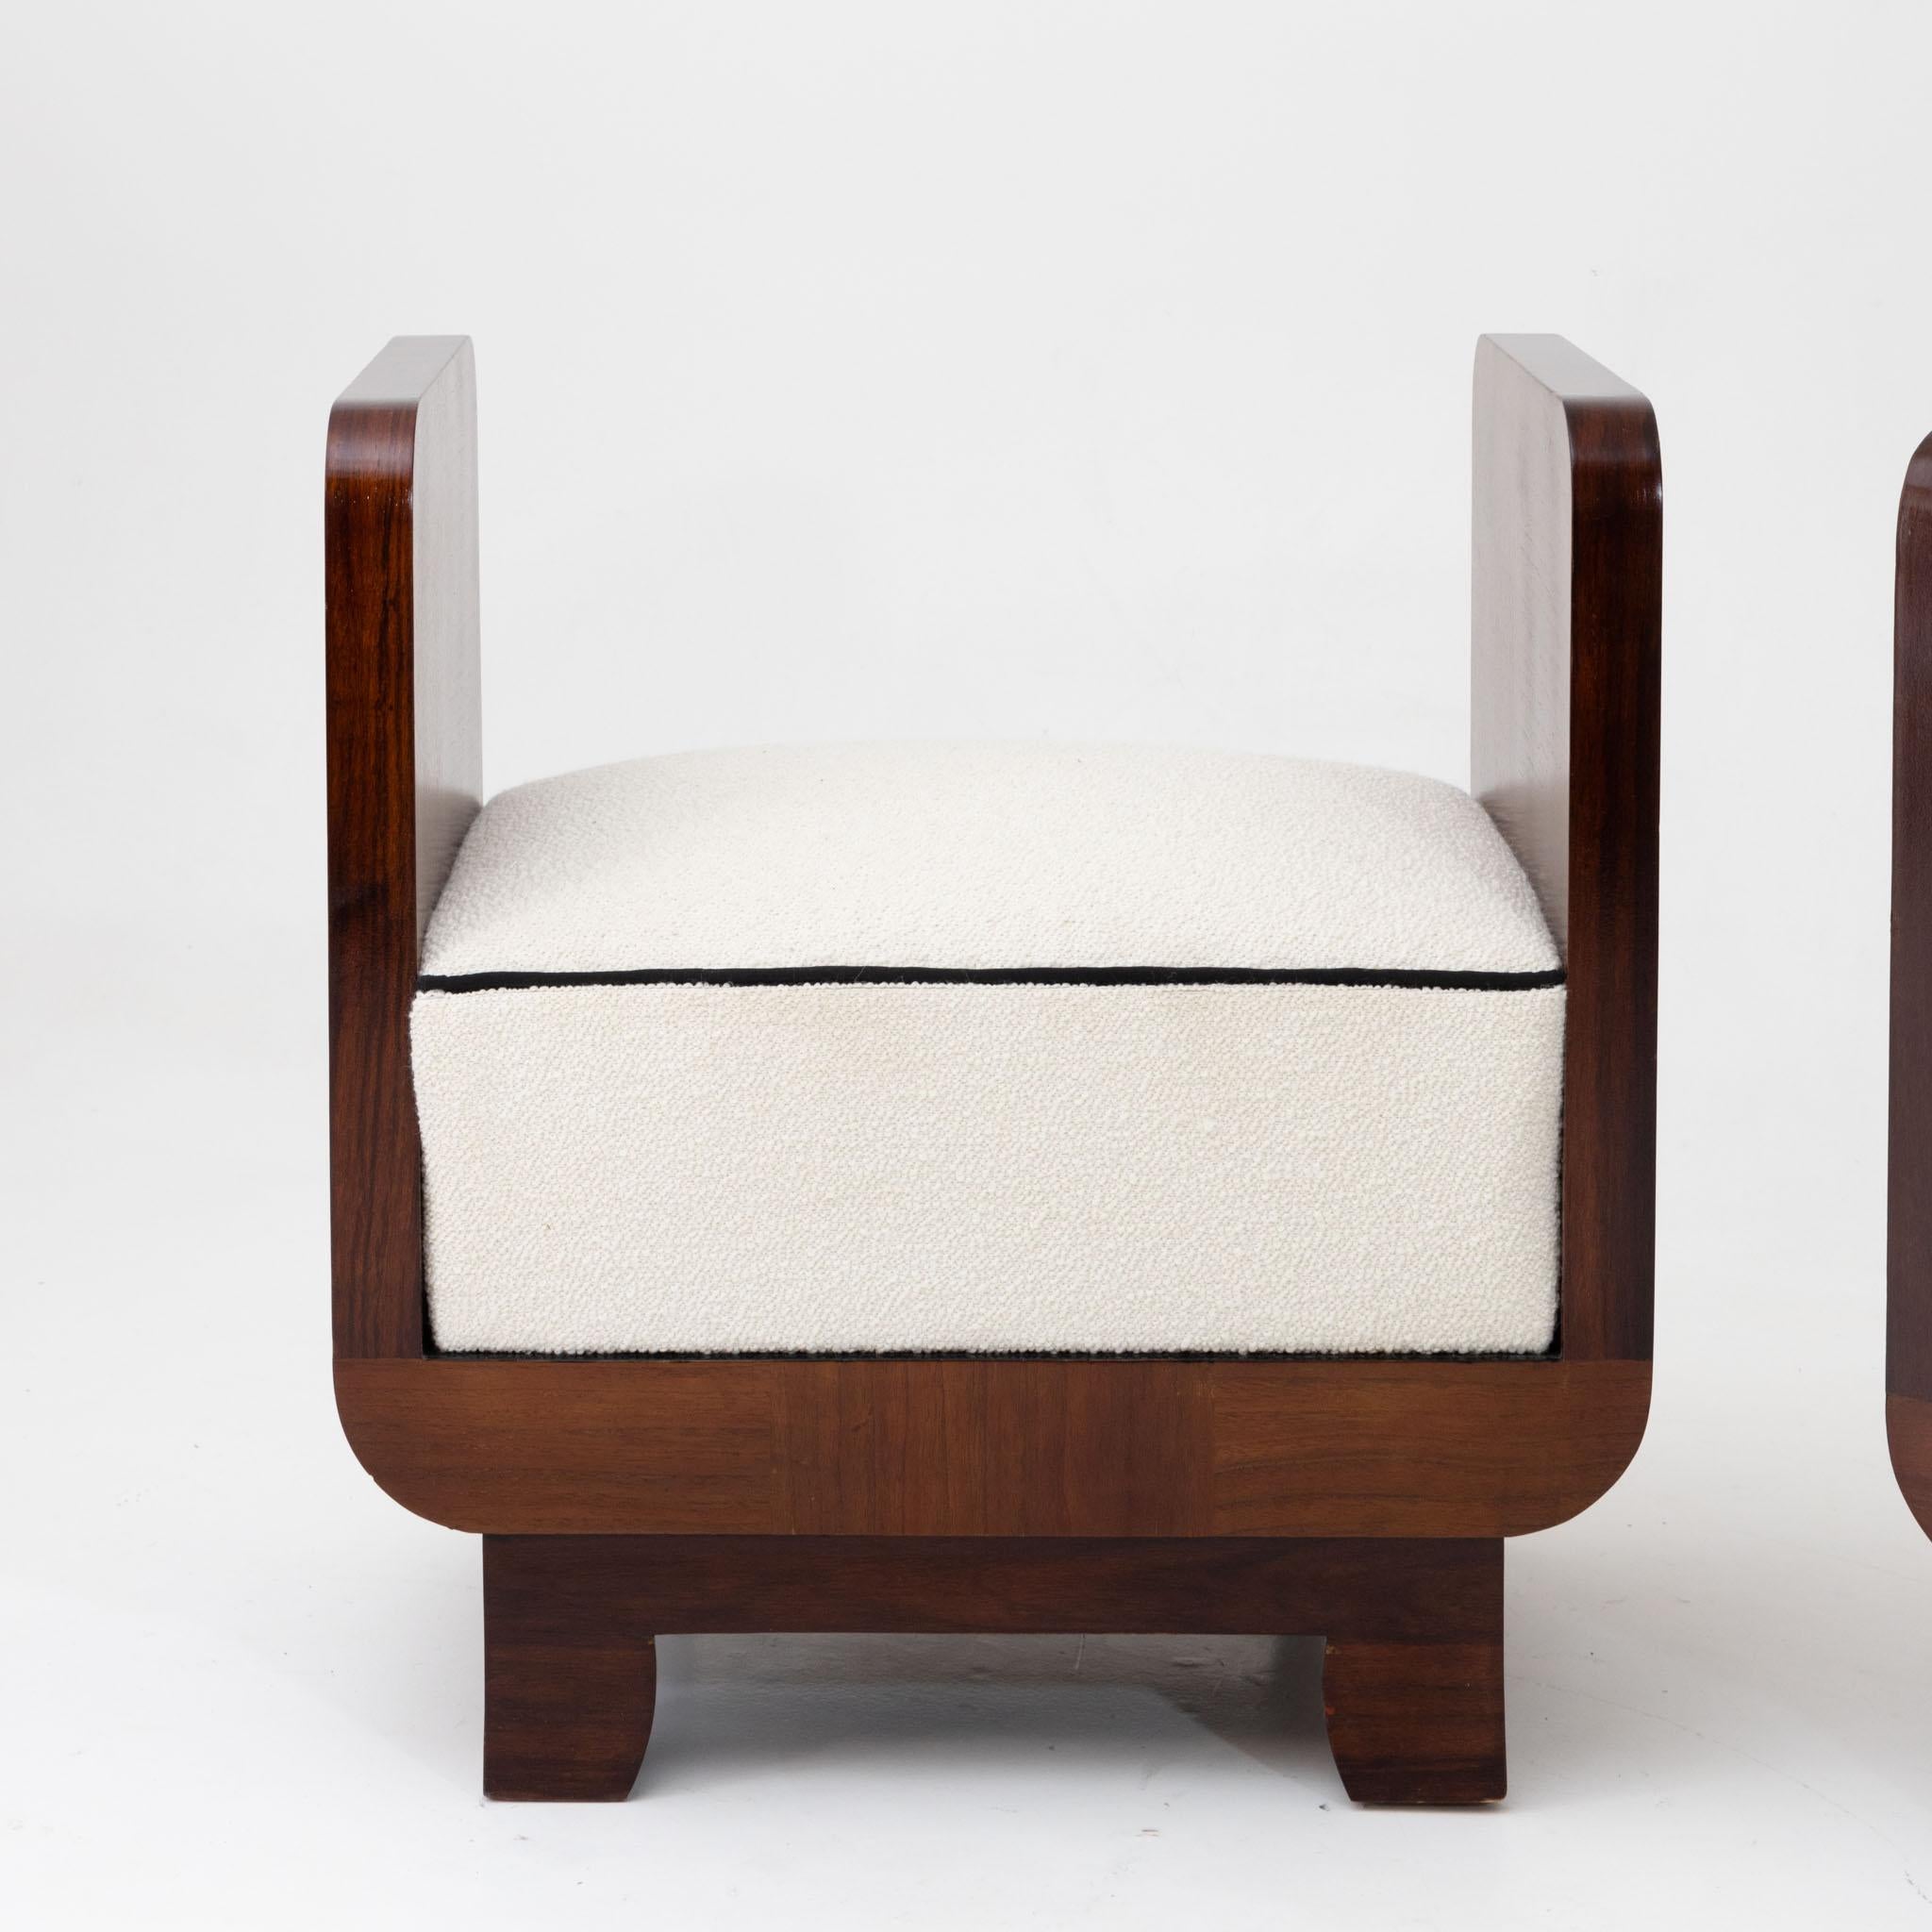 A pair of Art Deco wood stools. Featuring marquetry patterned sides.